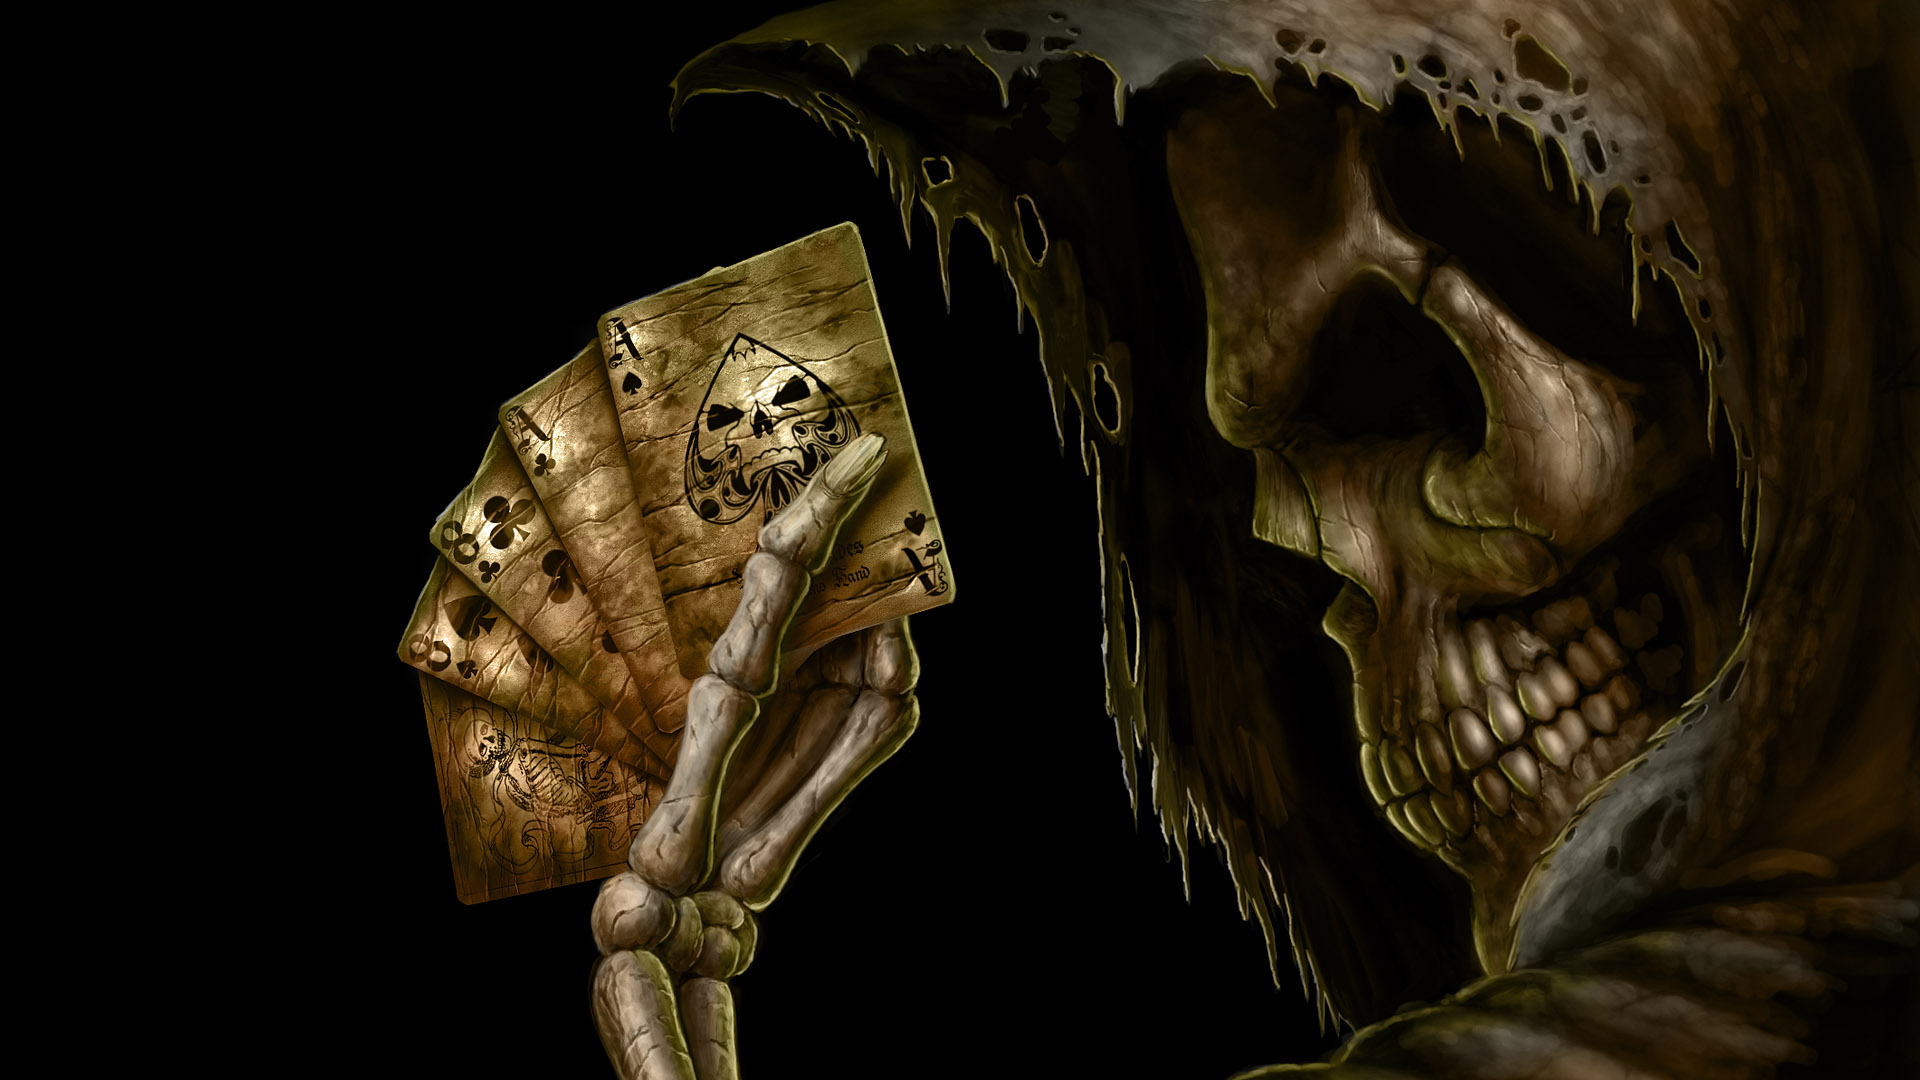 Wallpapers player poker death on the desktop